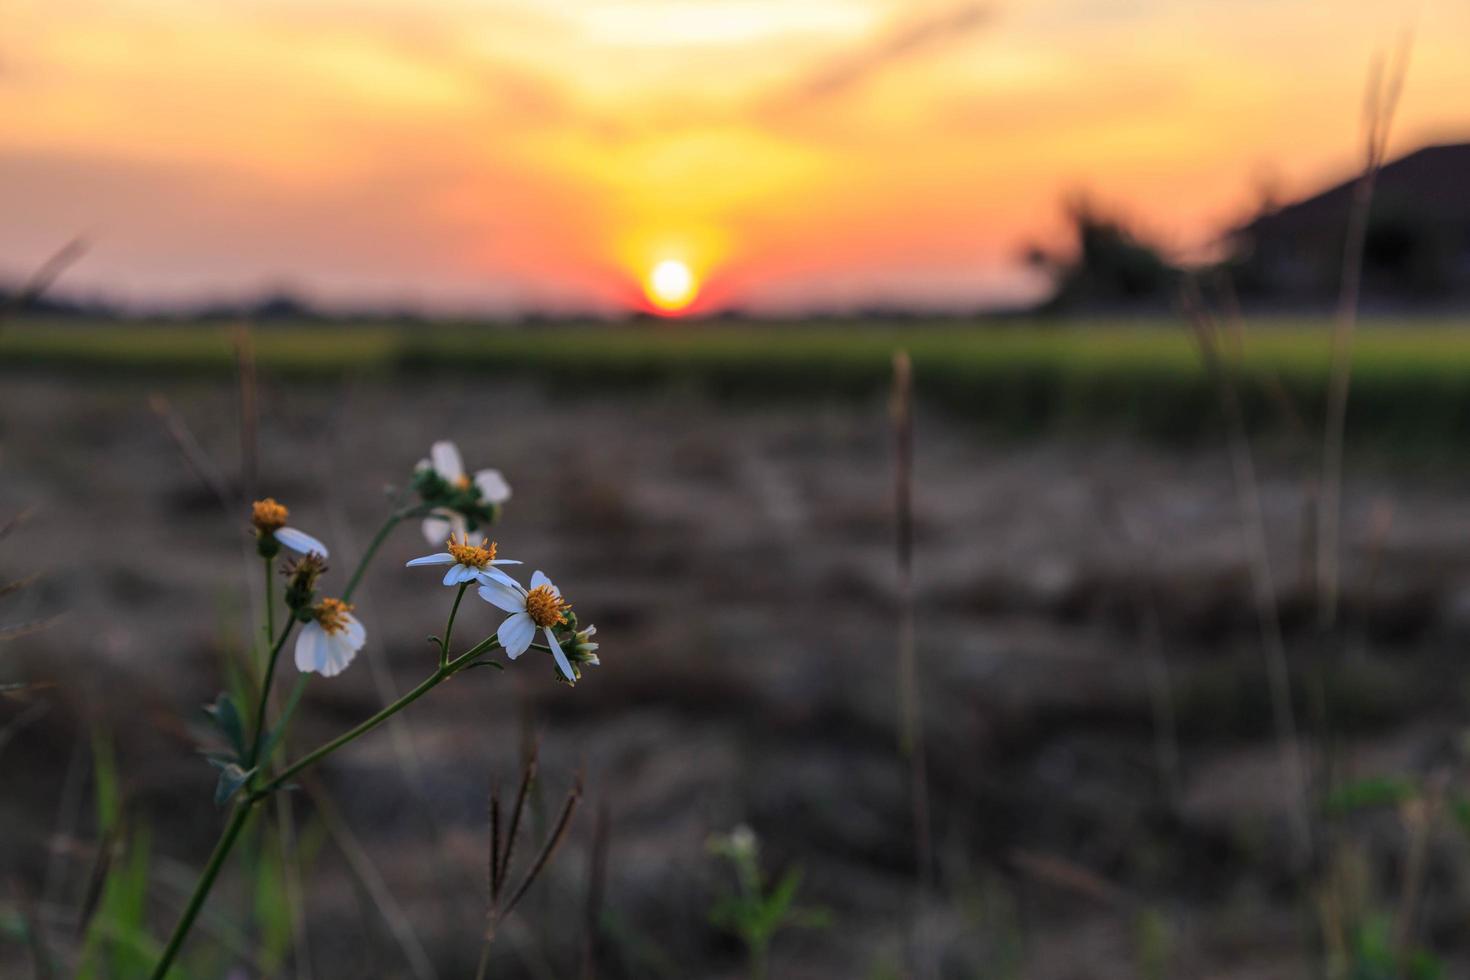 The flower and sunset  background photo